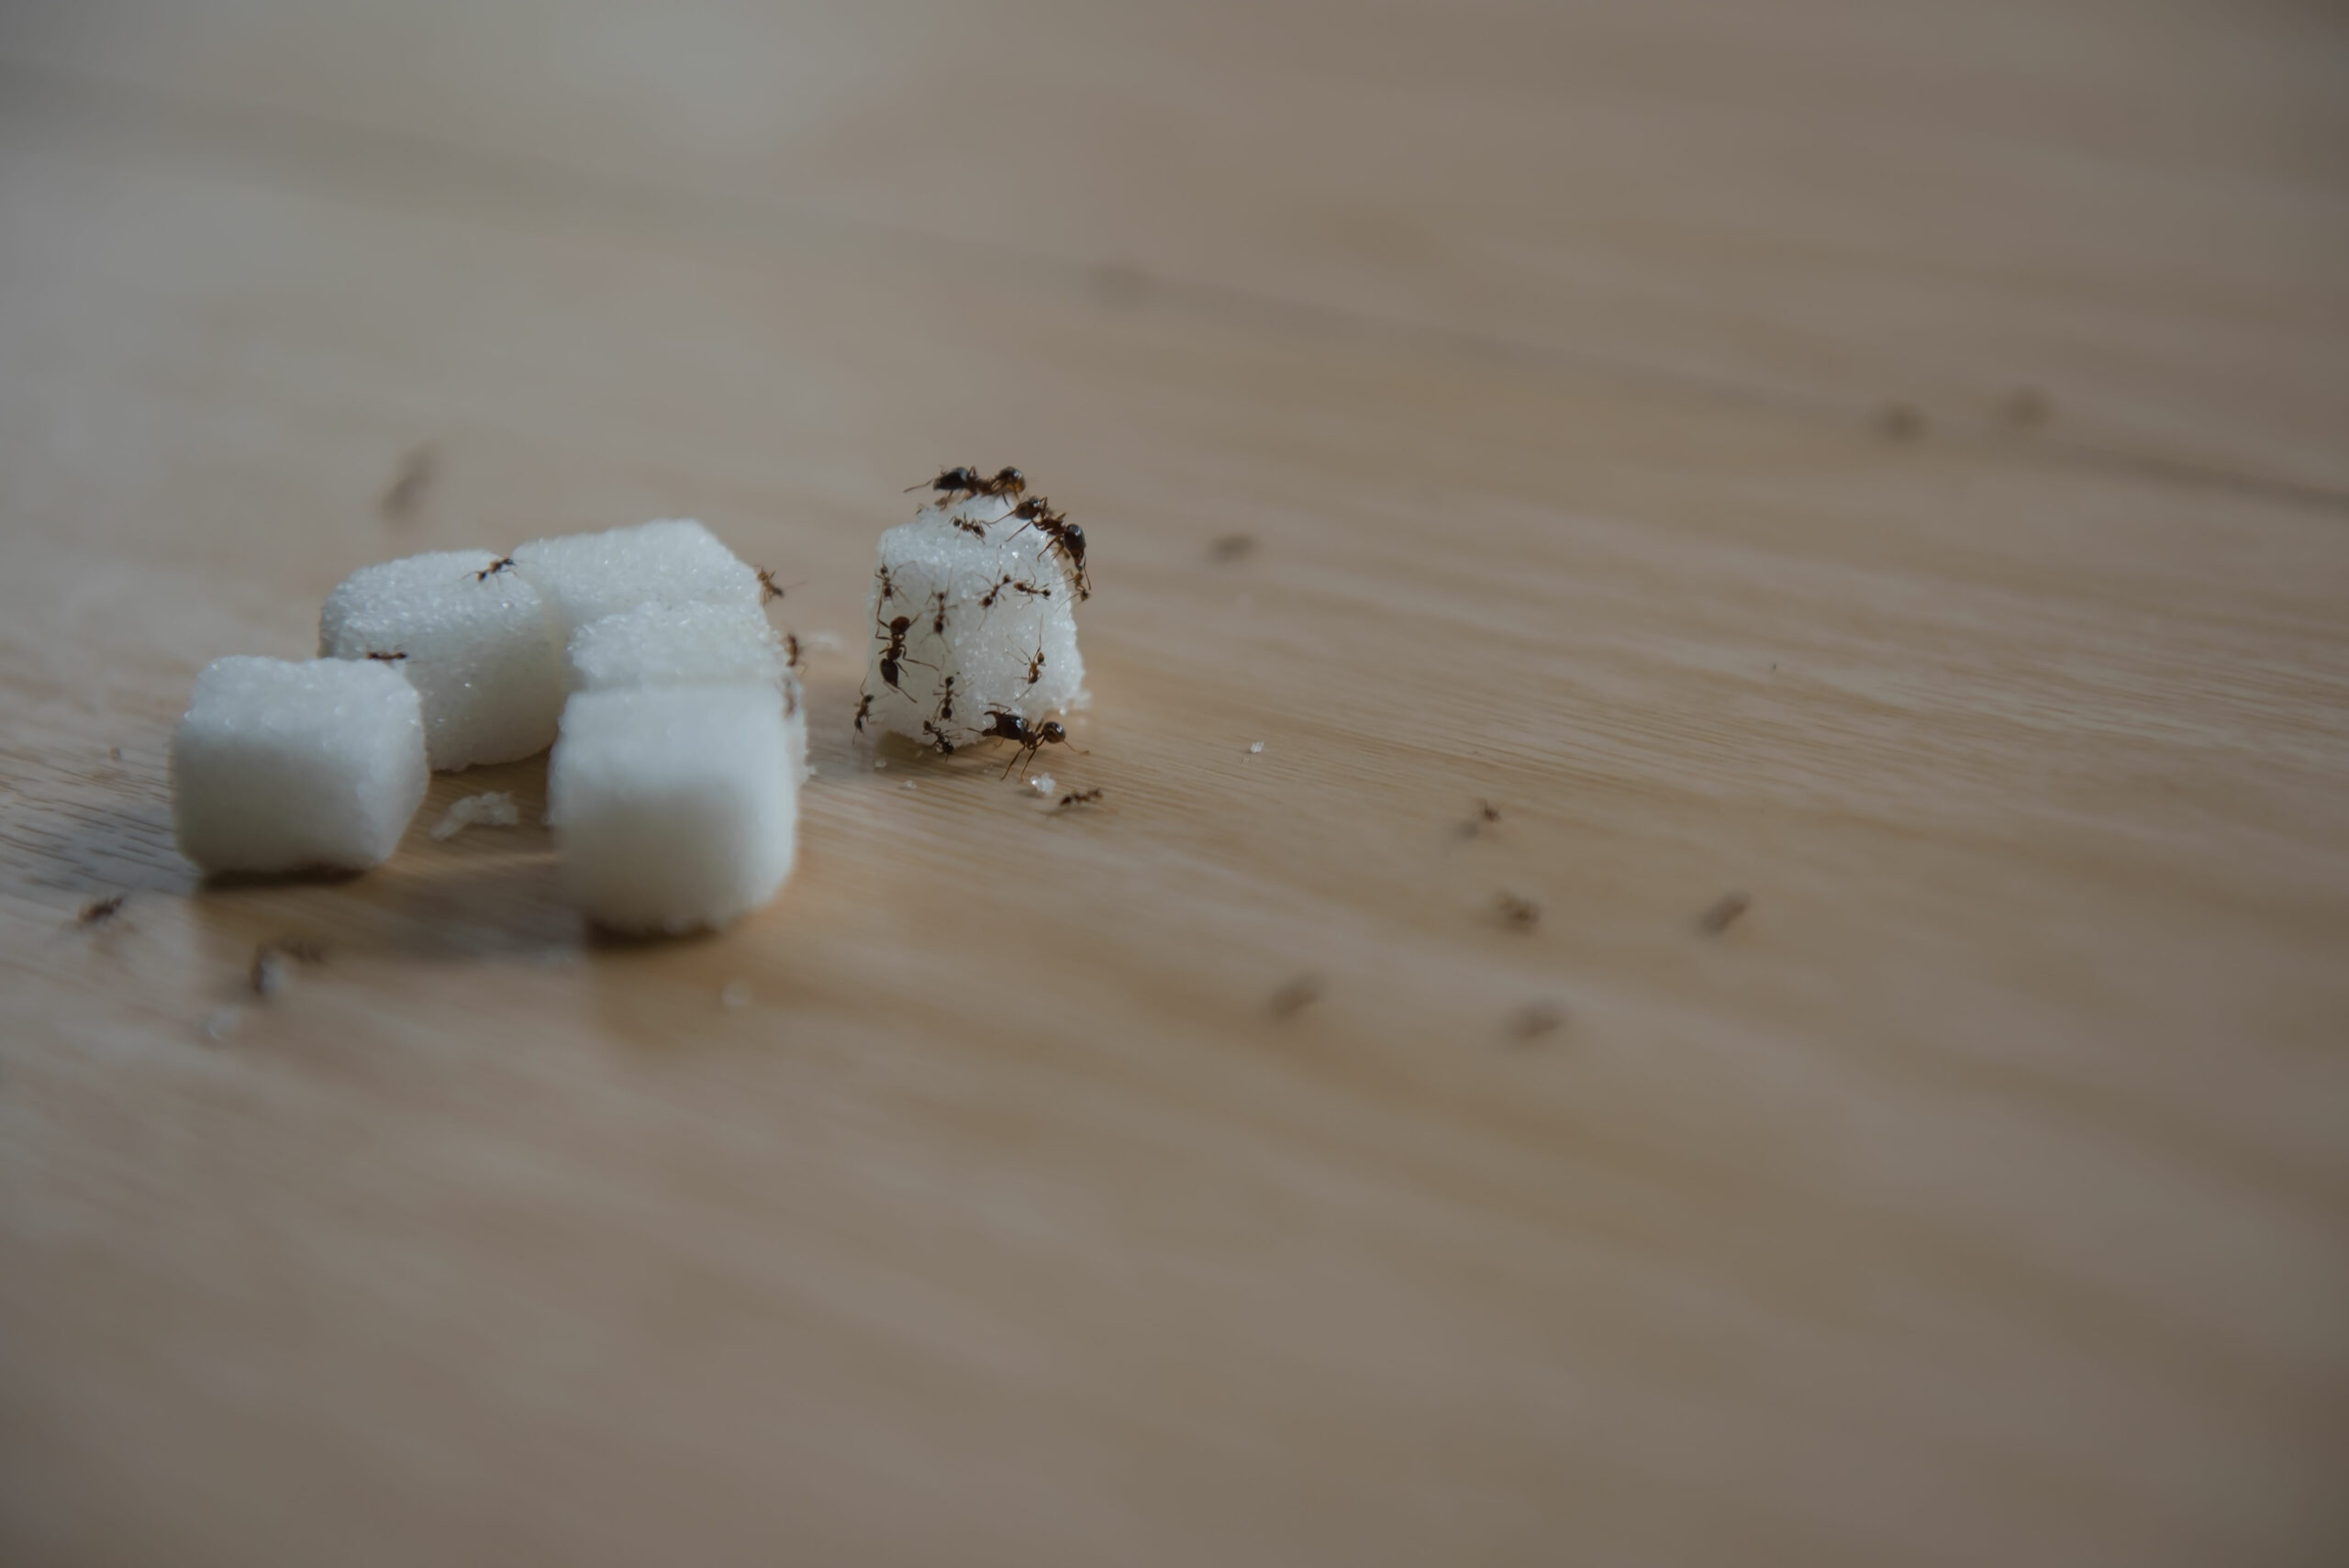 Close up of ants on sugar cubes